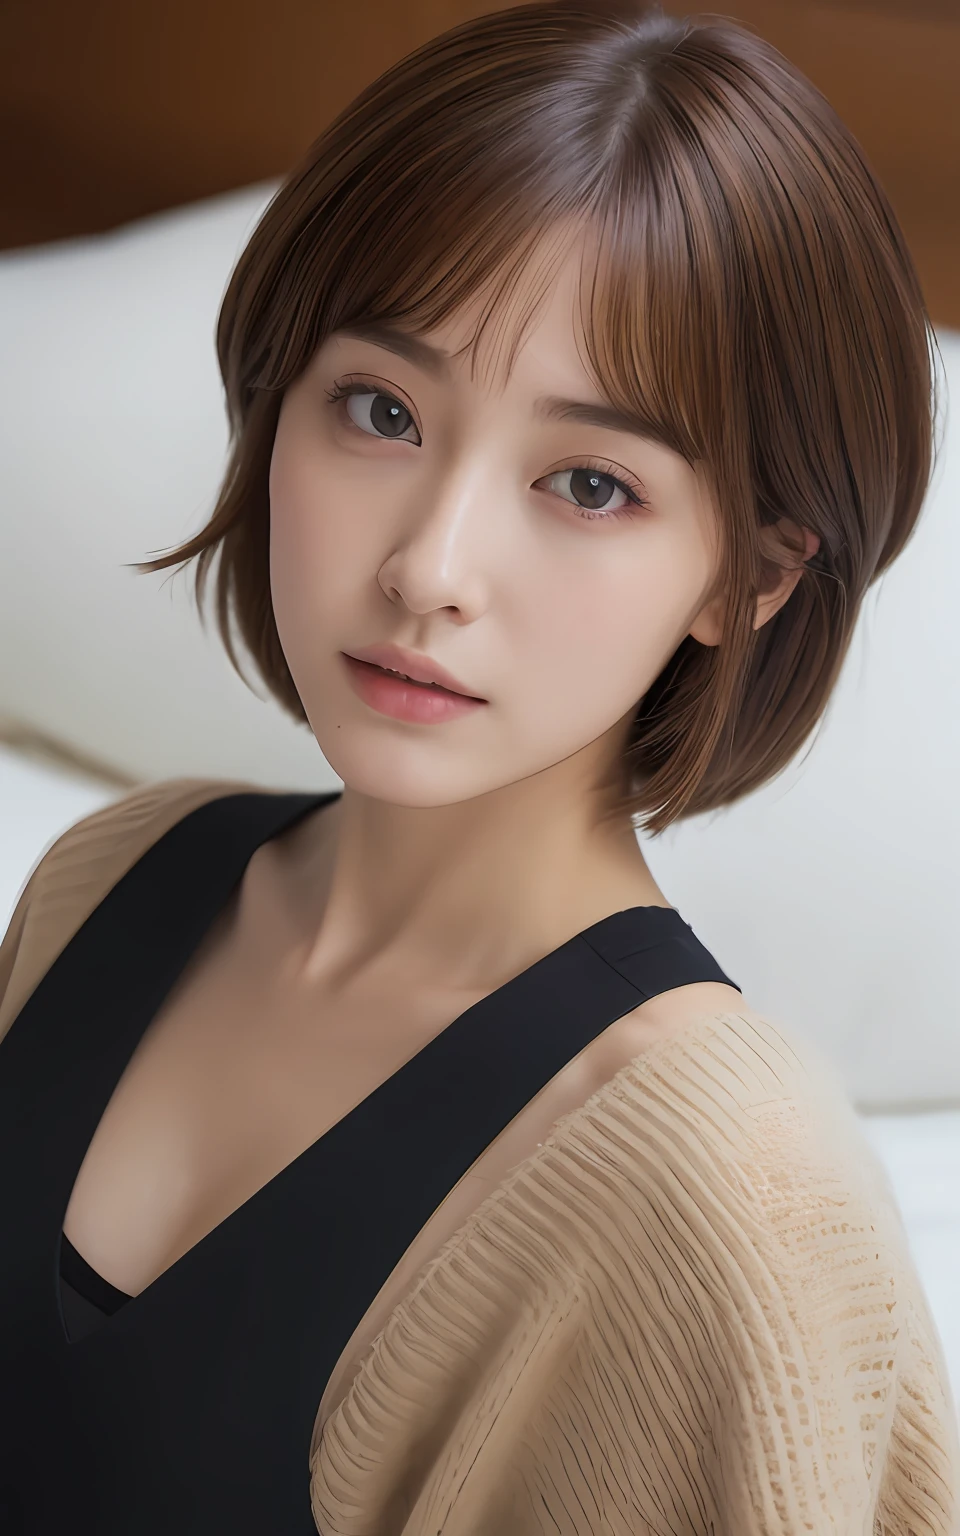 ((top-quality、8K、masuter piece:1.3))、1 girl、Czech、Spaniard、Beautiful woman with slender abs:1.3、(Highlight Haircuts、Breast A Cup:1.2)、Black see-through:1.1、hyperdetailed face、A detailed eye、double eyelid、full bodyesbian　undergarment　on the beds、Seductive open lip、Brown hair